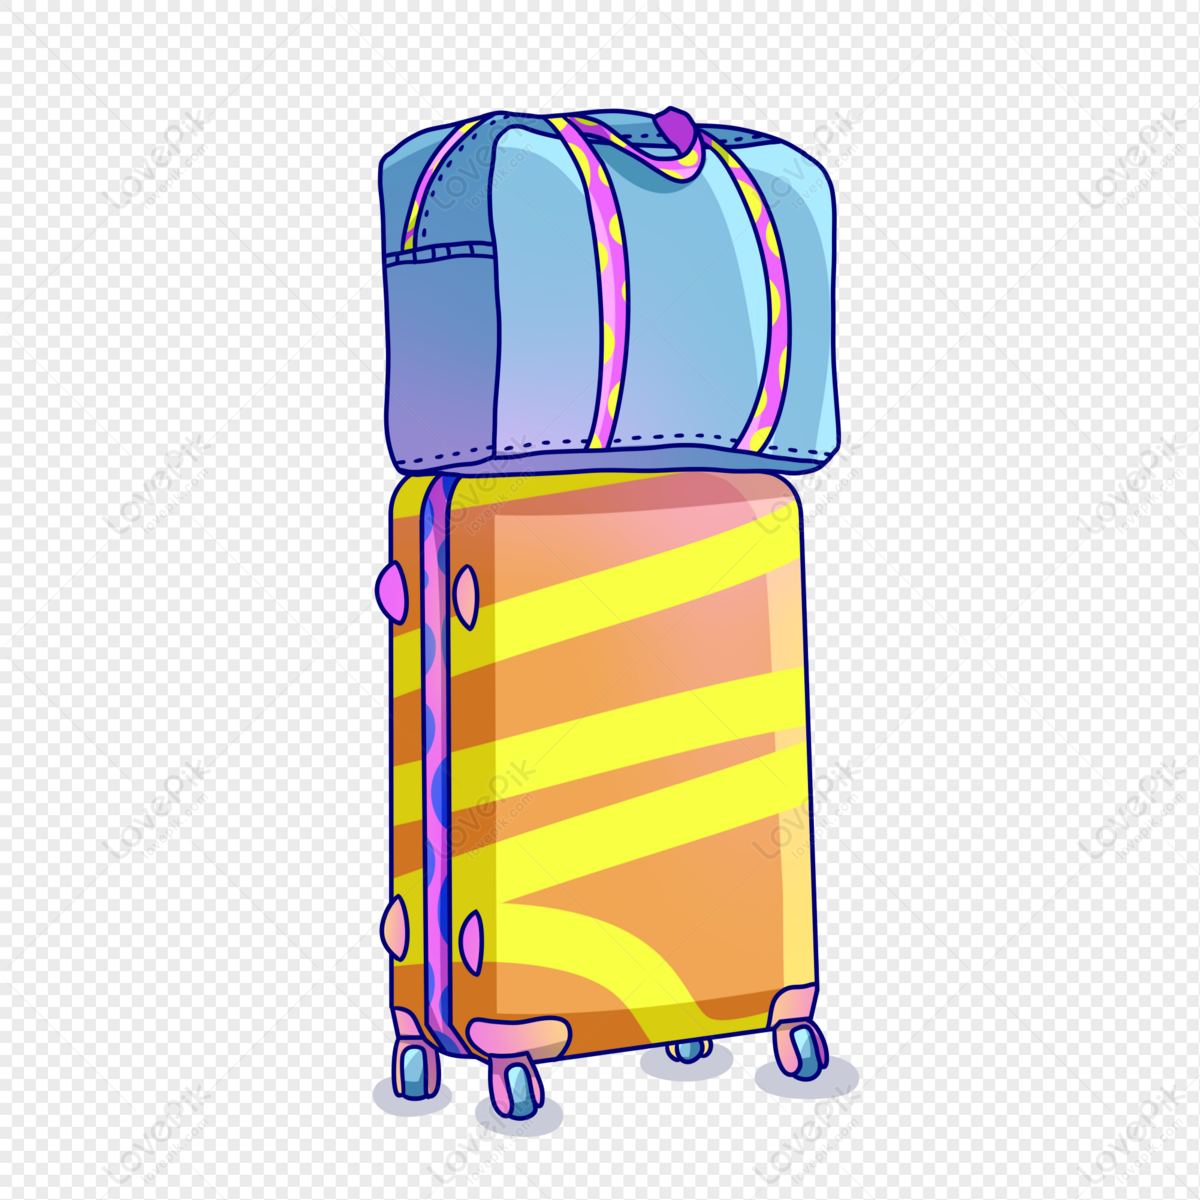 Cartoon Suitcase PNG Transparent Image And Clipart Image For Free Download  - Lovepik | 401484767